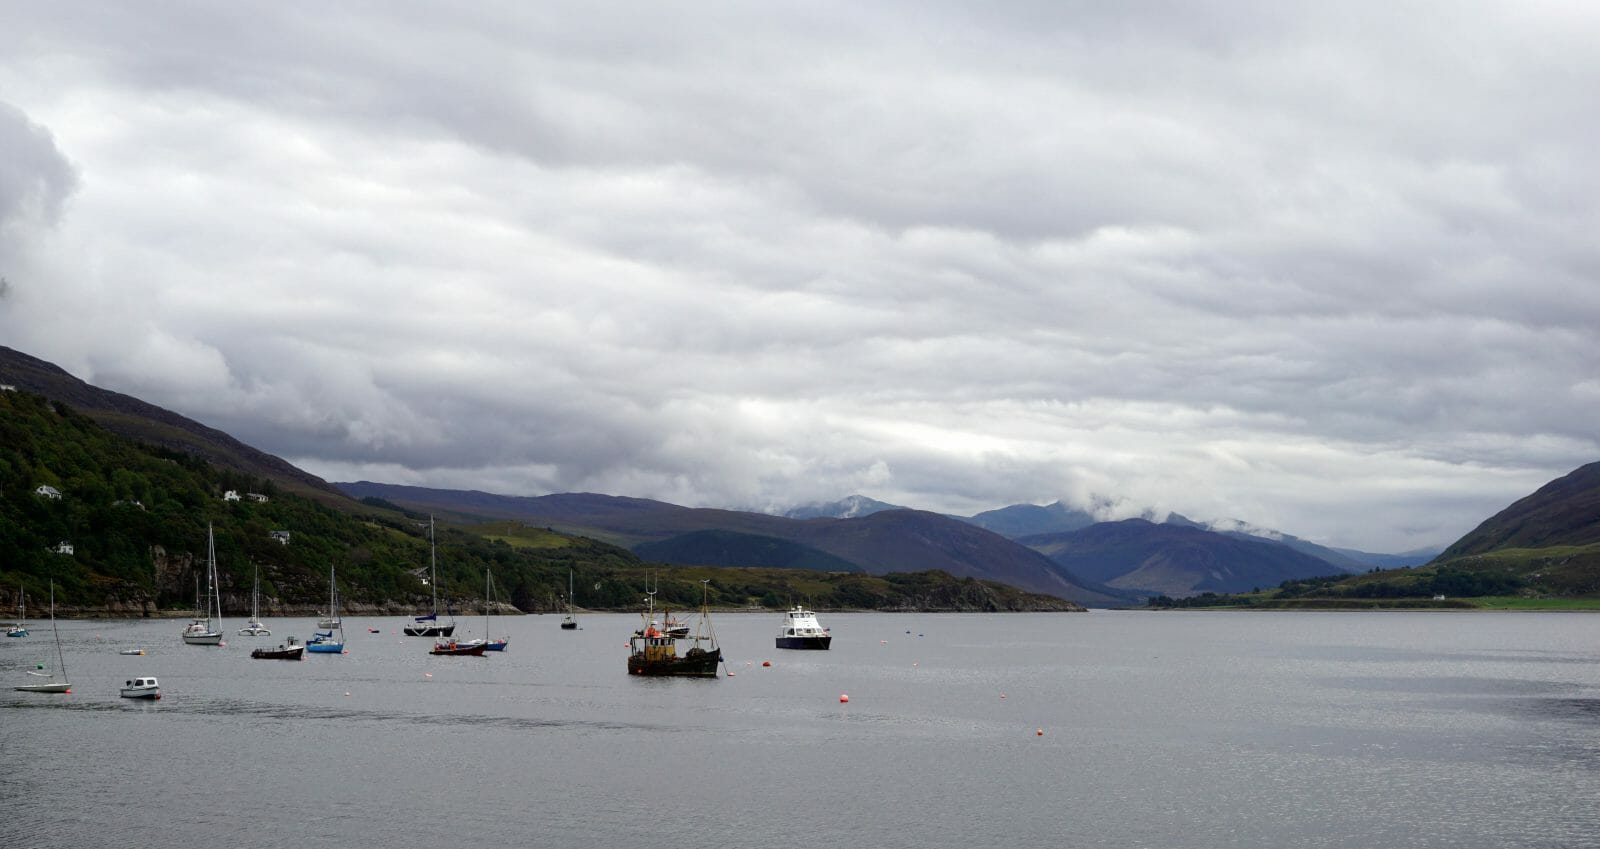 A view of Loch Broom, seen from Ullapool harbour